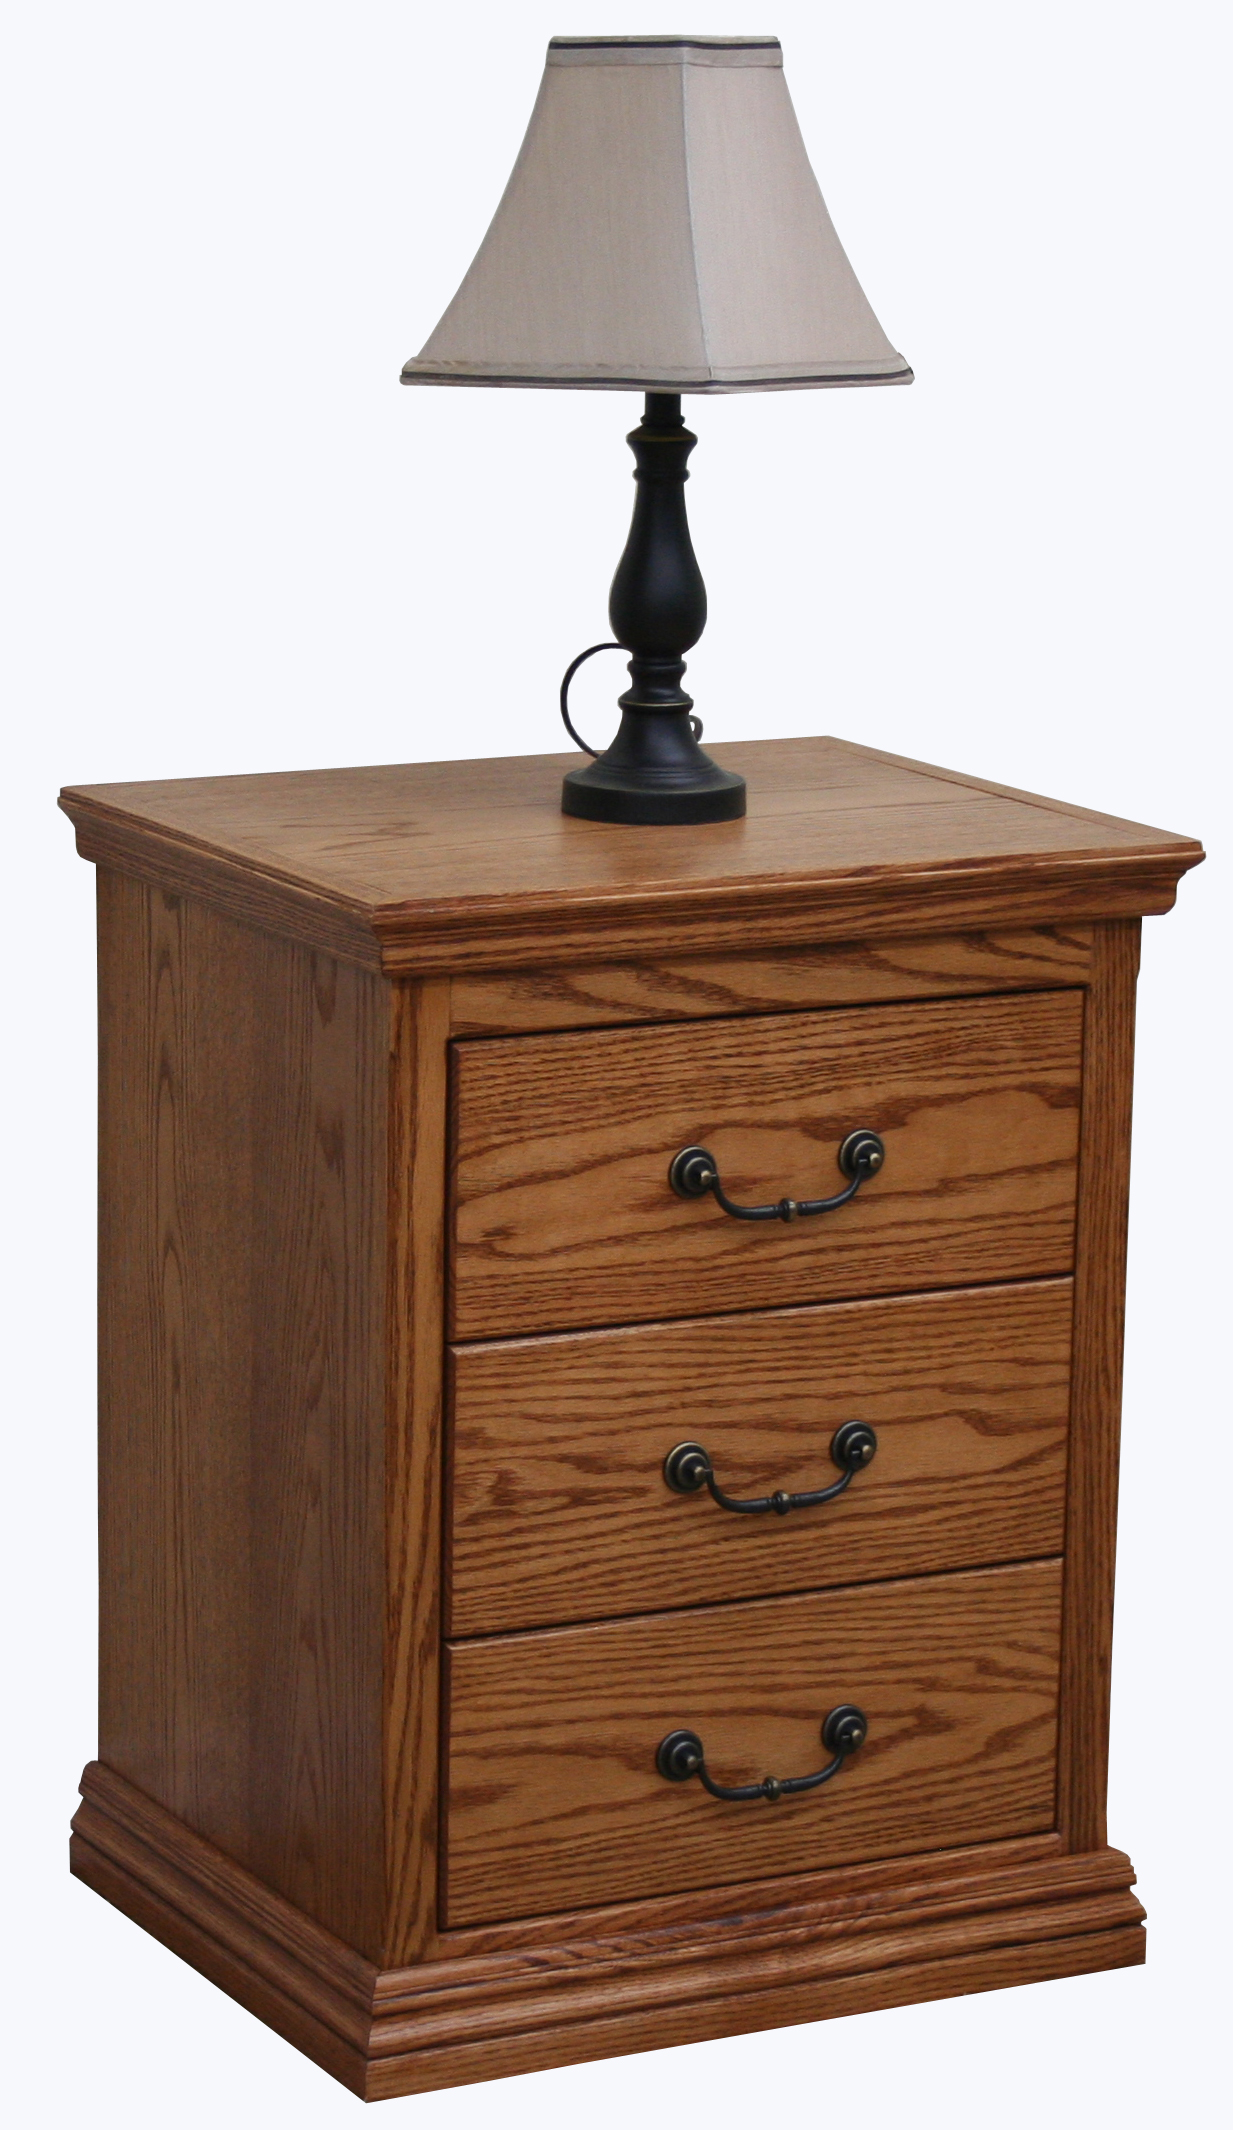 Traditional T314 3-Drawer Nightstand shown in Oak